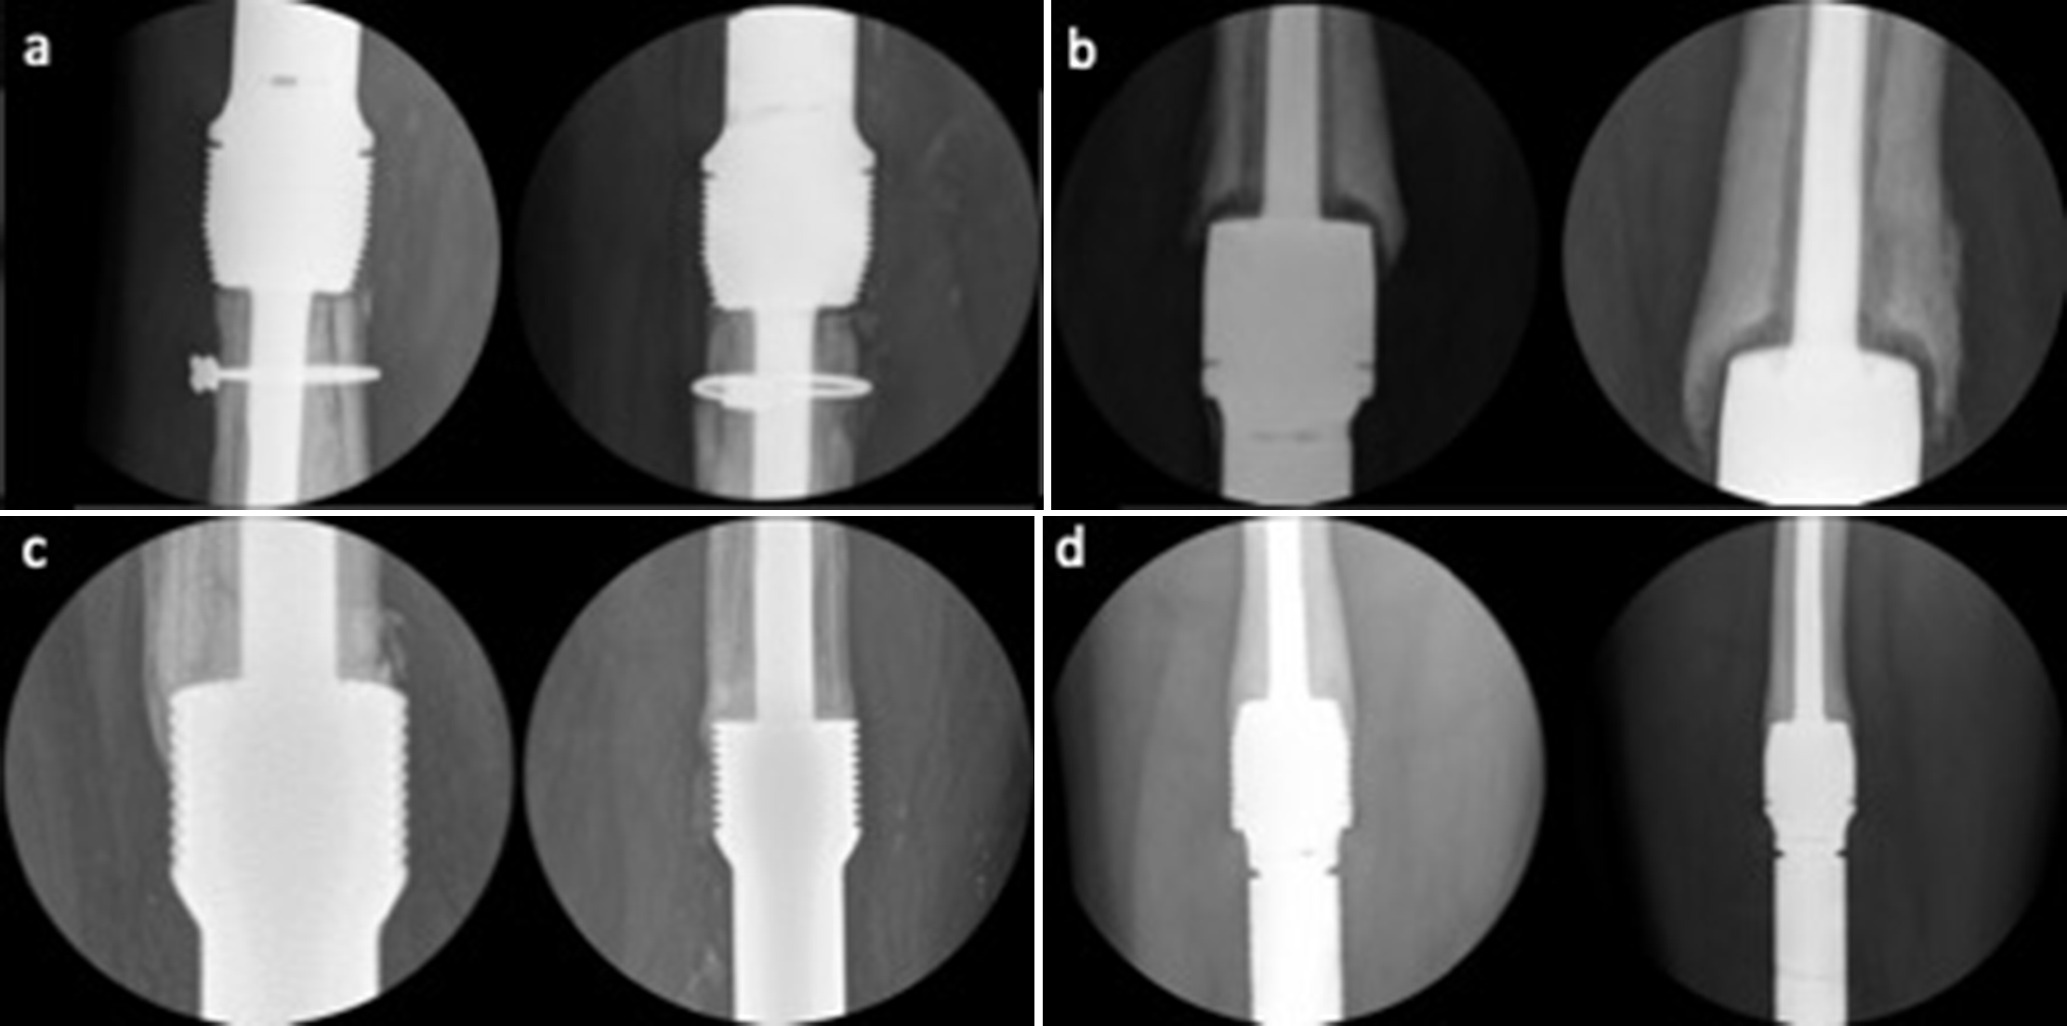 Fig. 1 
          AP and lateral plain radiographs representing the four grades of growth: a) Grade 1: No osseointegration or bone growth. b) Grade 2: Bone growth around collar with gap between new bone and collar. c) Grade 3: Osseointegration in 1 or 2 zones. d) Grade 4: Osseointegration in 3 or 4 zones.
        